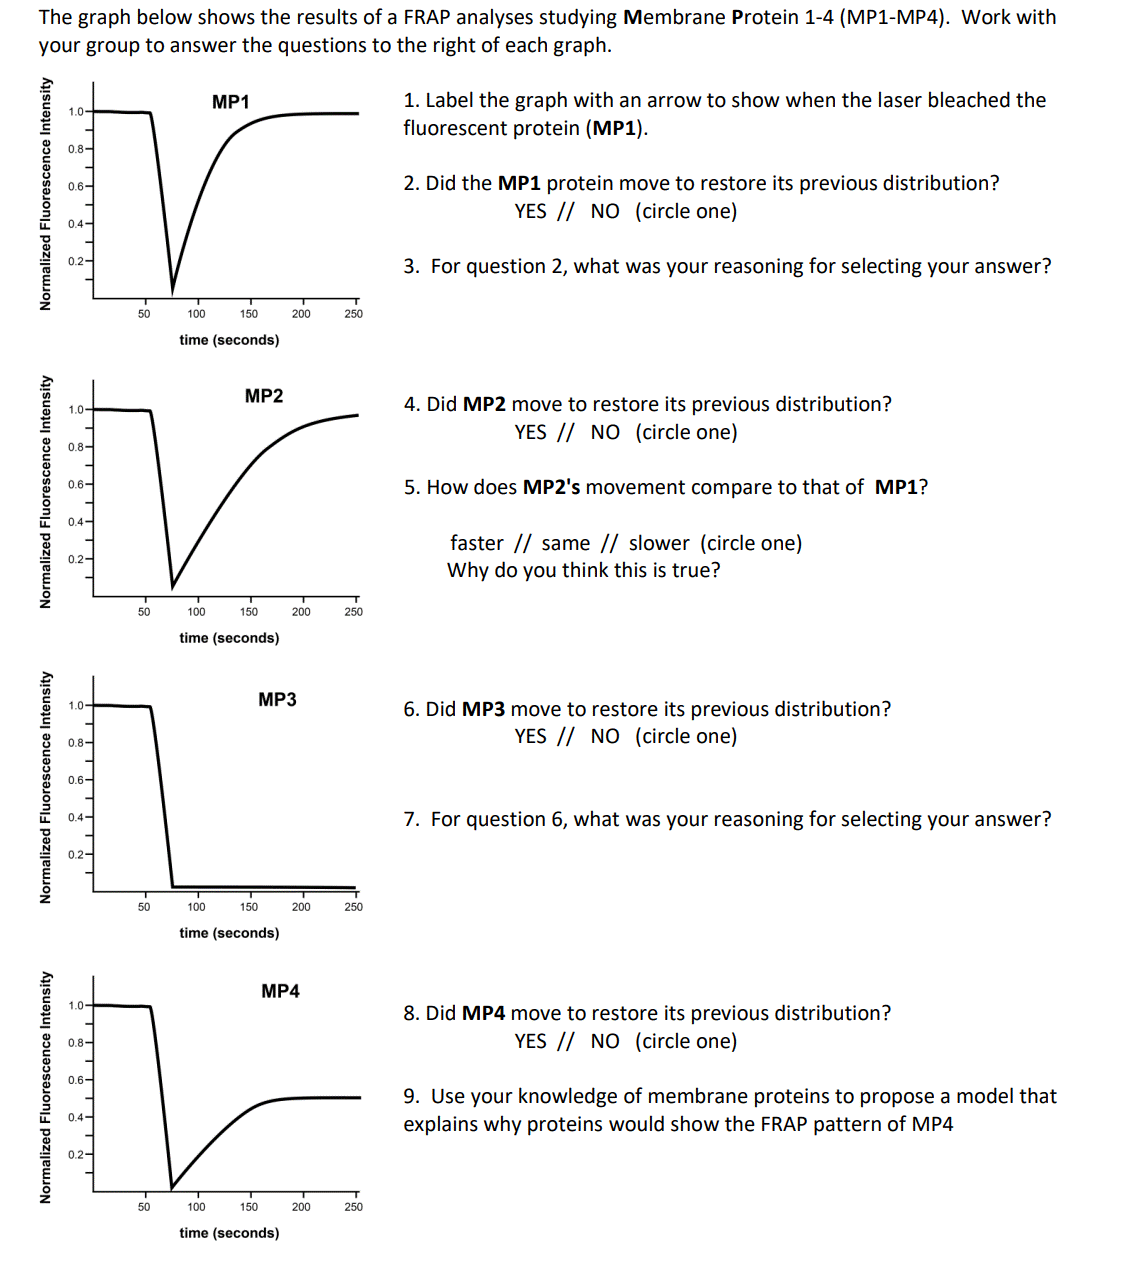 The graph below shows the results of a FRAP analyses studying Membrane Protein 1-4 (MP1-MP4). Work with
your group to answer the questions to the right of each graph.
MP1
1. Label the graph with an arrow to show when the laser bleached the
1.0-
fluorescent protein (MP1).
0.8-
0.6-
2. Did the MP1 protein move to restore its previous distribution?
YES // NO (circle one)
0.4-
0.2-
3. For question 2, what was your reasoning for selecting your answer?
50
100
150
200
250
time (seconds)
MP2
4. Did MP2 move to restore its previous distribution?
YES // NO (circle one)
1.0-
0.8-
0.6-
5. How does MP2's movement compare to that of MP1?
0.4-
faster // same // slower (circle one)
Why do you think this is true?
0.2-
50
100
150
200
250
time (seconds)
MP3
1.0-
6. Did MP3 move to restore its previous distribution?
YES // NO (circle one)
0.8-
0.6-
7. For question 6, what was your reasoning for selecting your answer?
0.4-
0.2-
50
100
150
200
250
time (seconds)
MP4
1.0-
8. Did MP4 move to restore its previous distribution?
YES // NO (circle one)
0.8-
0.6-
9. Use your knowledge of membrane proteins to propose a model that
explains why proteins would show the FRAP pattern of MP4
0.4-
0.2-
50
100
150
200
250
time (seconds)
Normalized Fluorescence Intensity
Normalized Fluorescence Intensity
Normalized Fluorescence Intensity
Normalized Fluorescence Intensity
